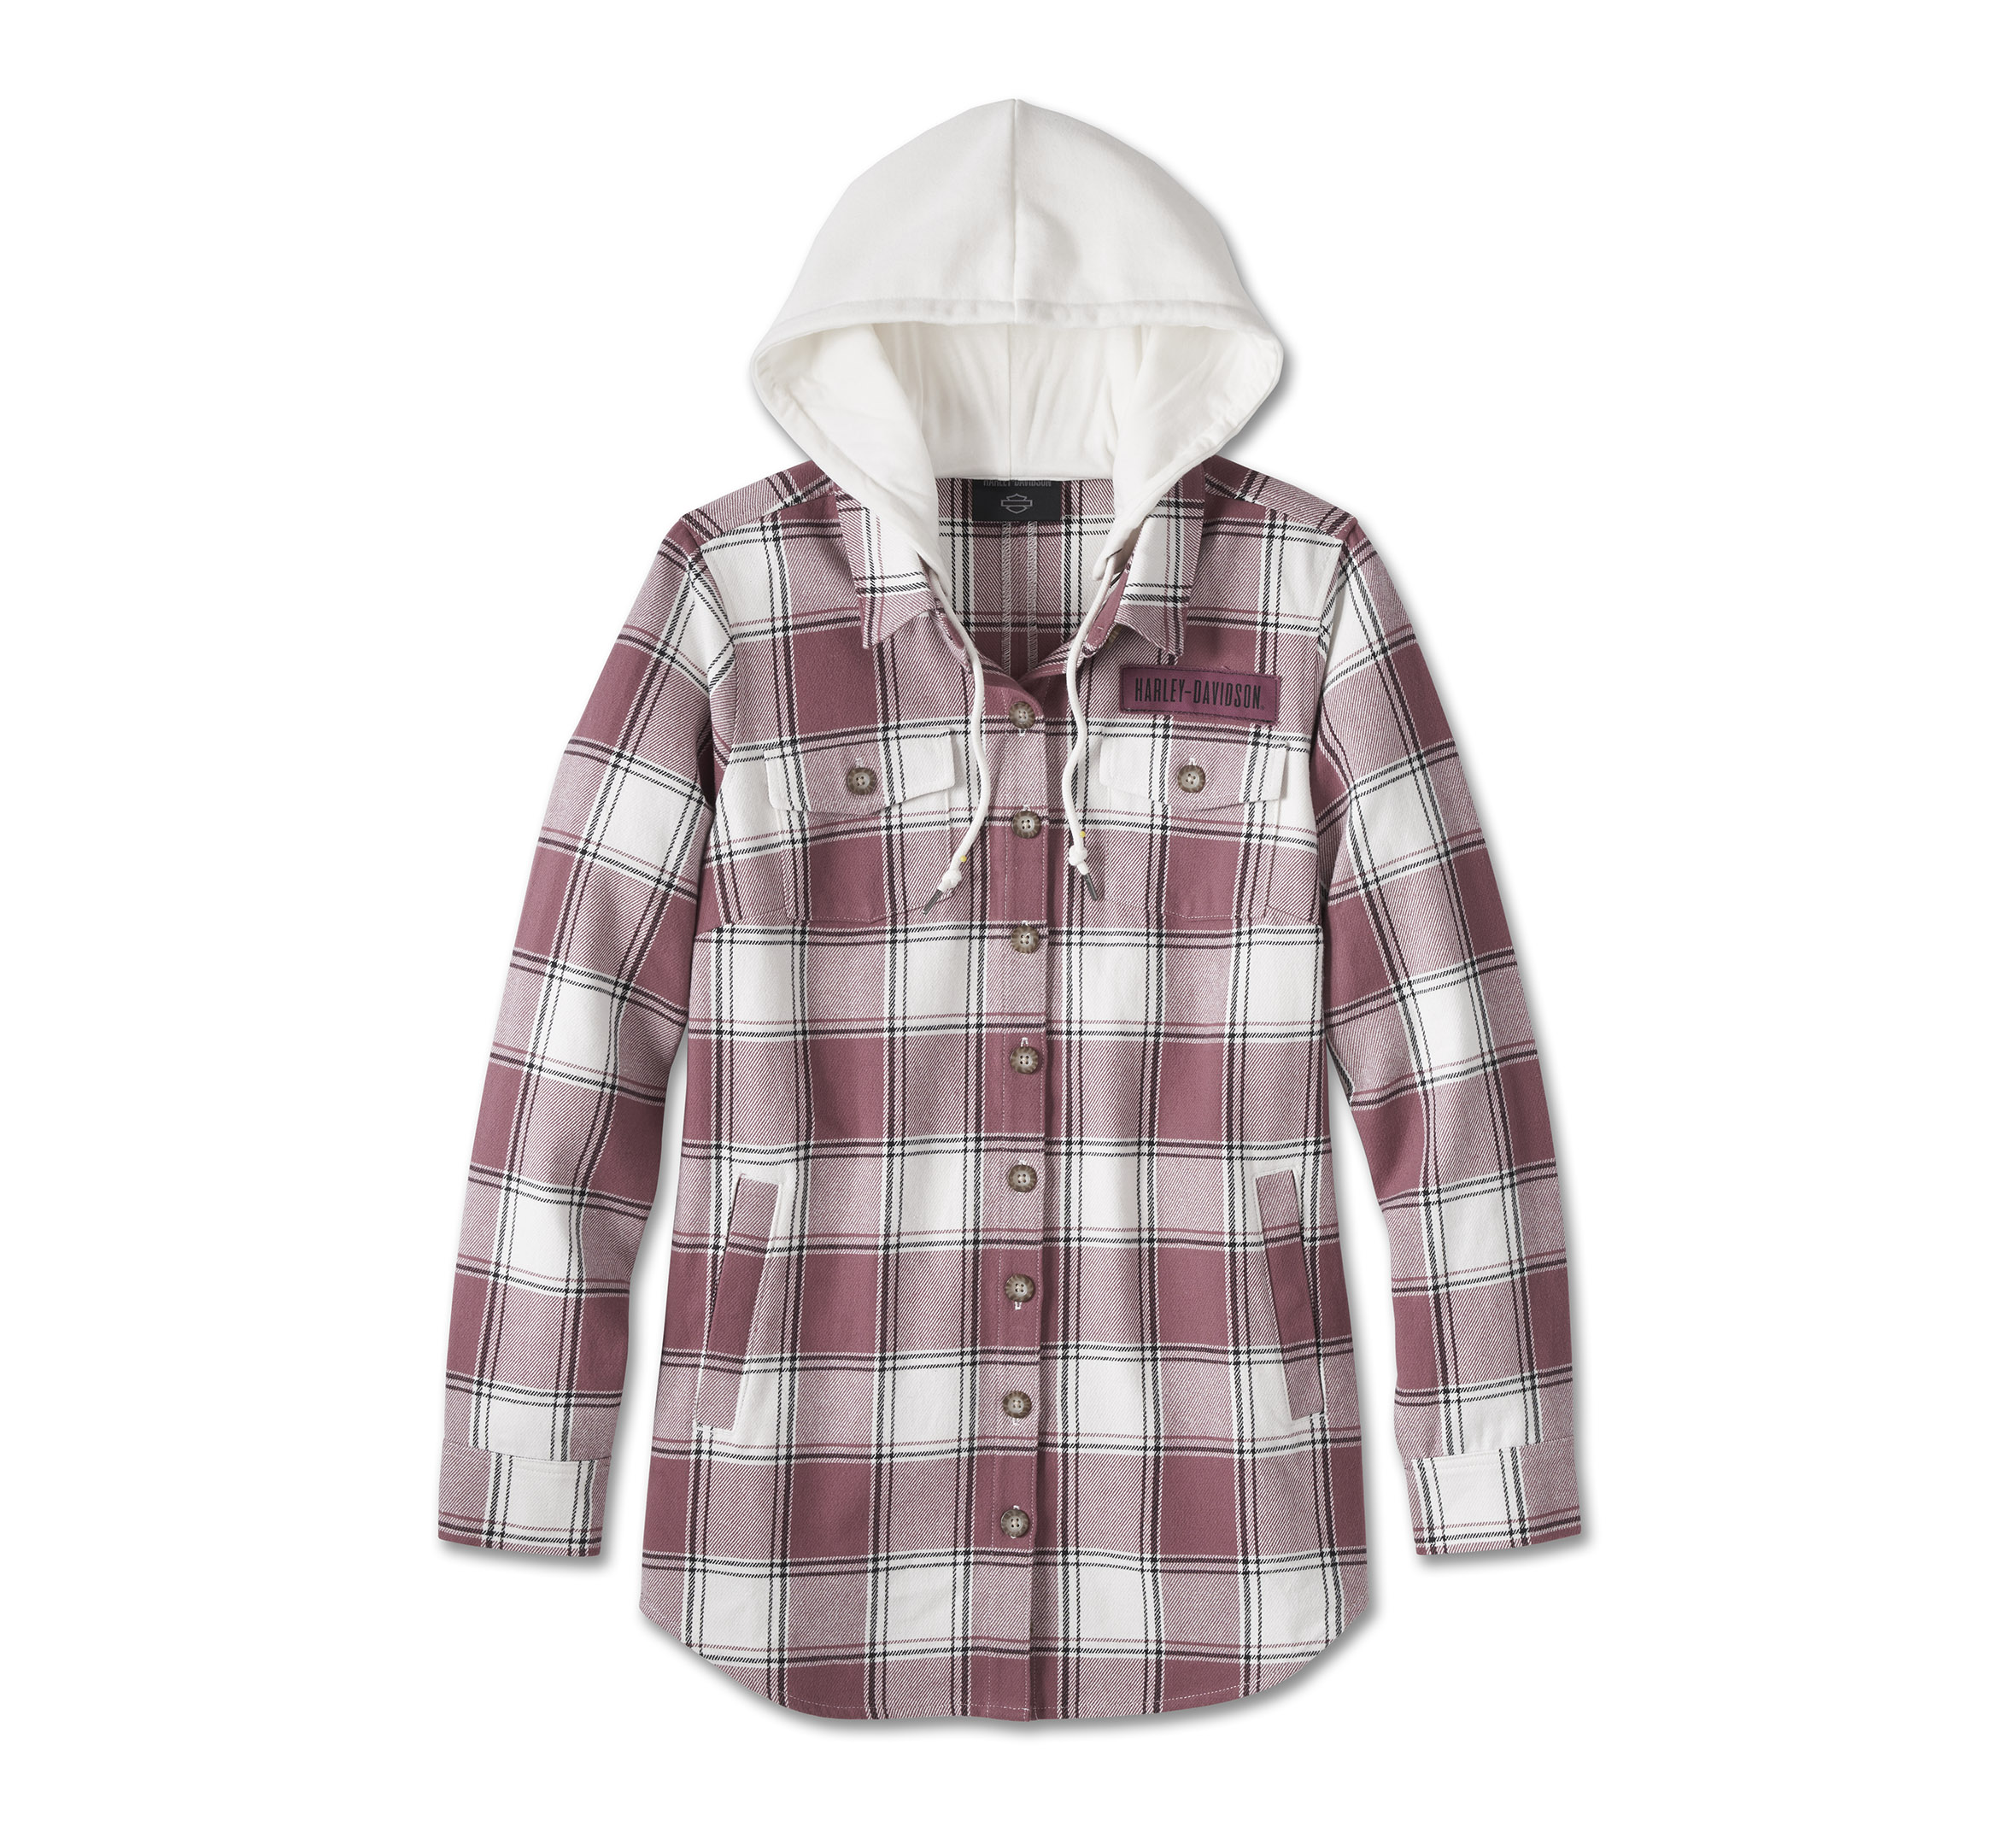 Women's Thrill Seeker Tunic with Removable Hood - YD Plaid - Crushed Berry